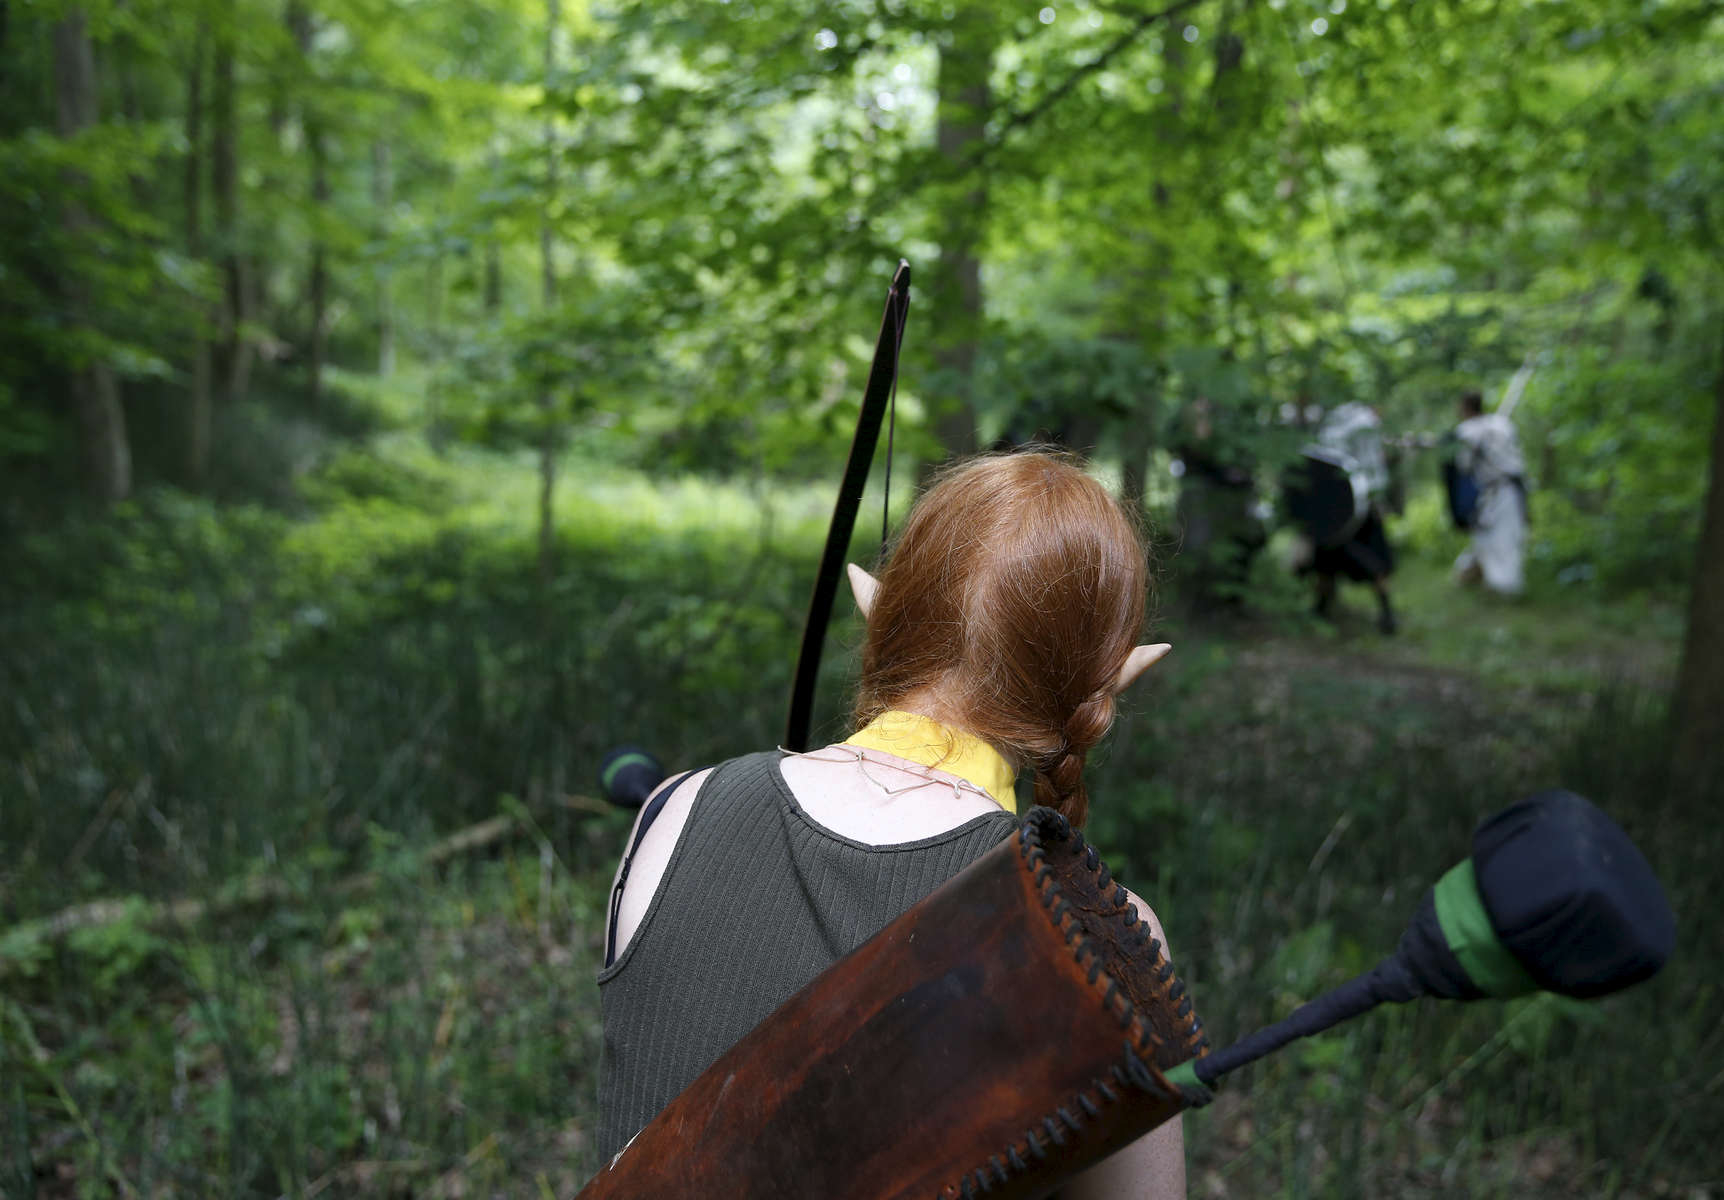 Slippery Rock, PA -- 6/22/2017 -  An elf quietly stalks her prey during a woods battle. The sport is called Dagorhir which means “Battle Lords” in Tolkien’s Elvish language. 